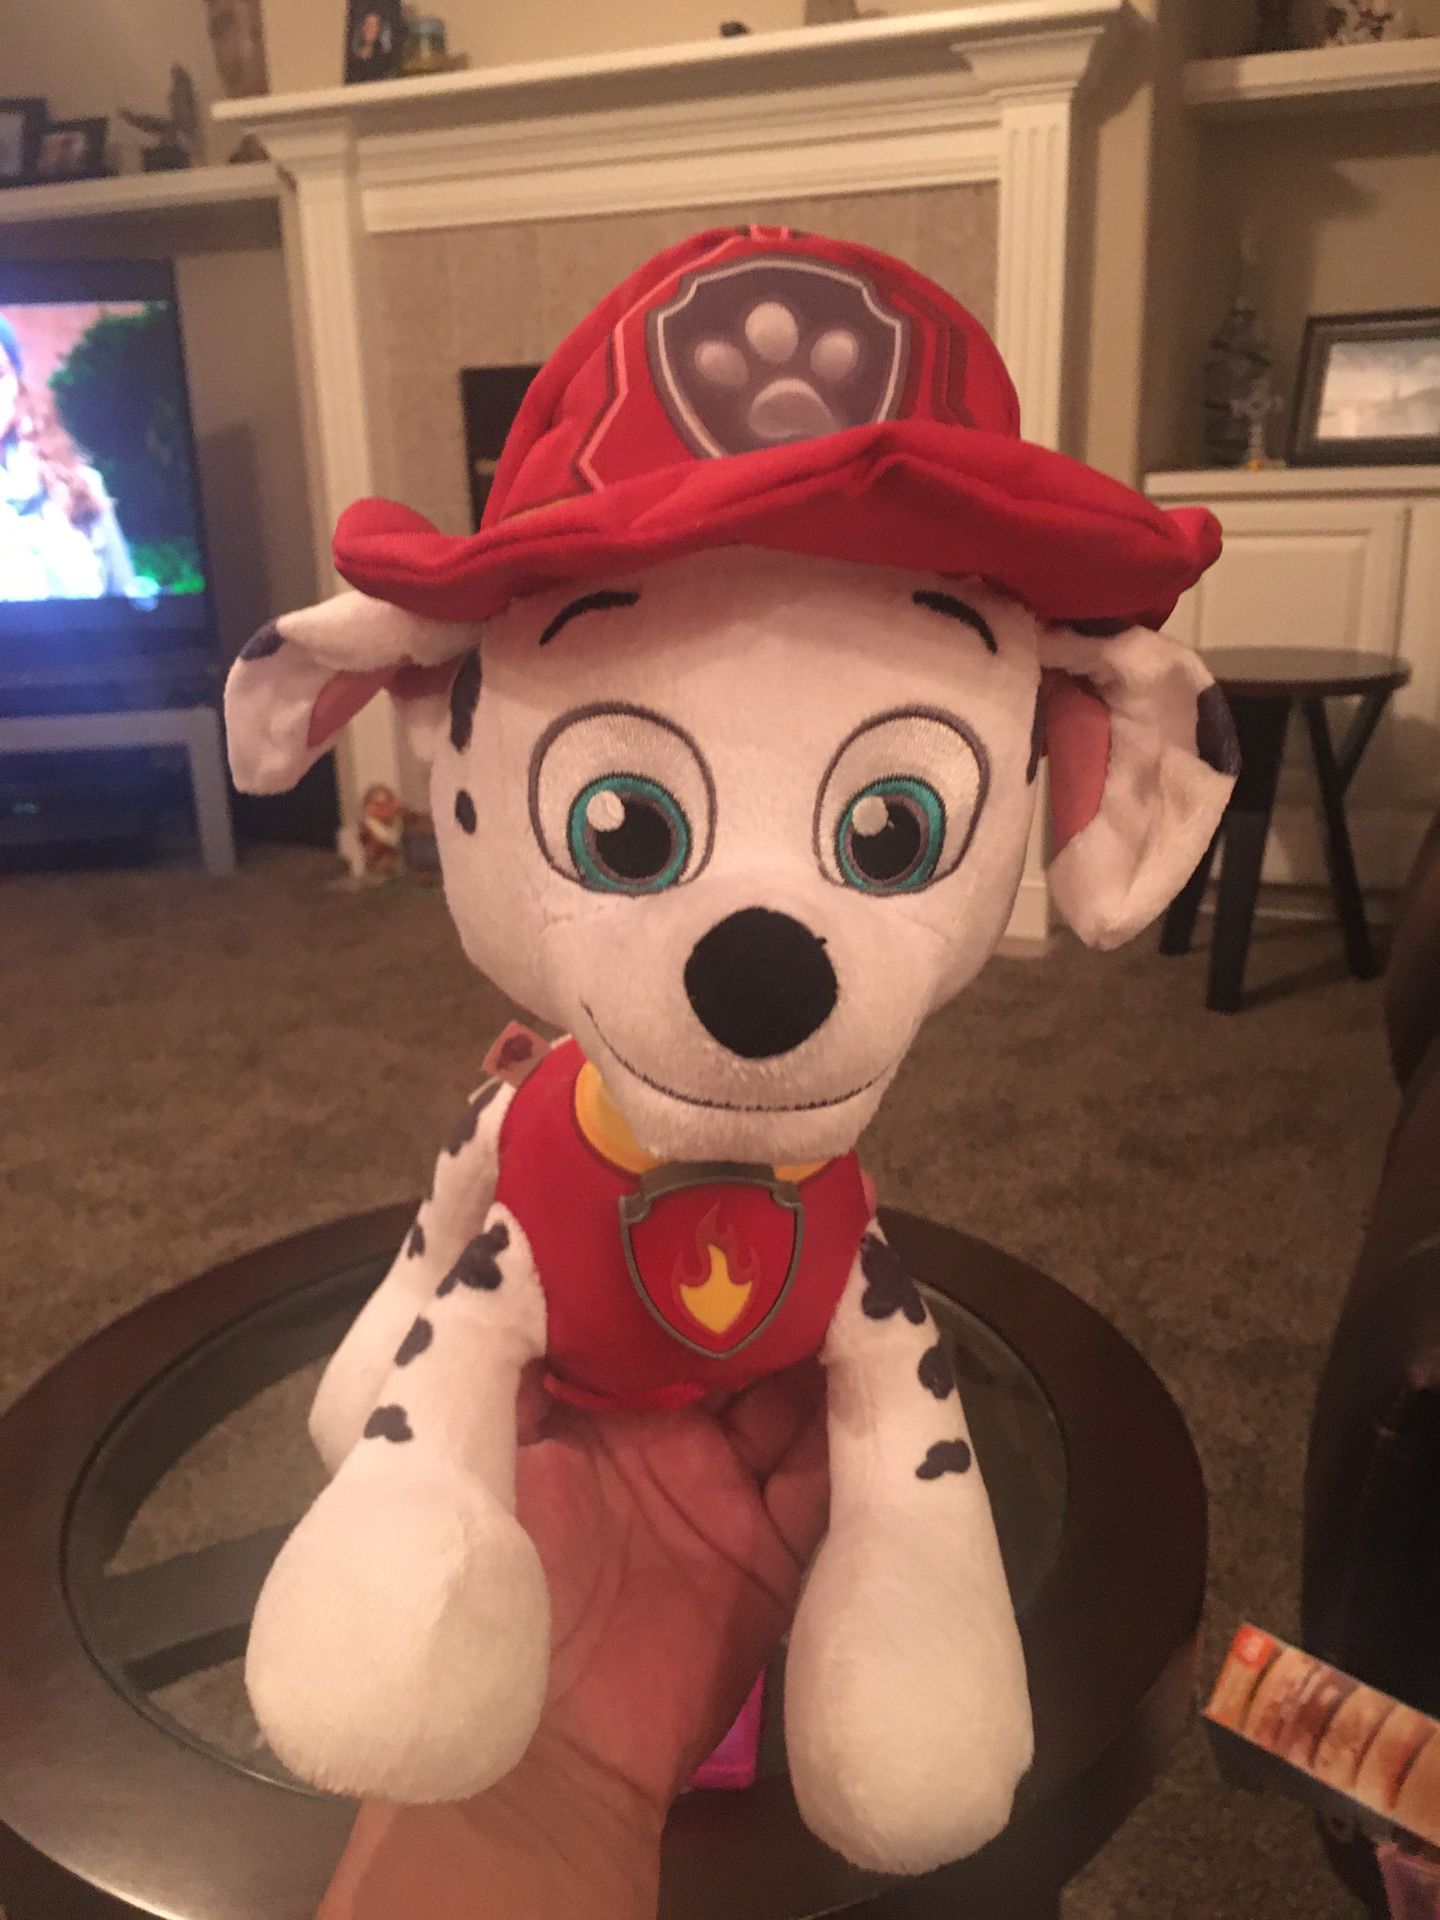 PAW PATROL TALKING 13 INCH SOFT TOY! PRESS HIS BADGE TO HESR HIM TALK!! Clean! Price is firm